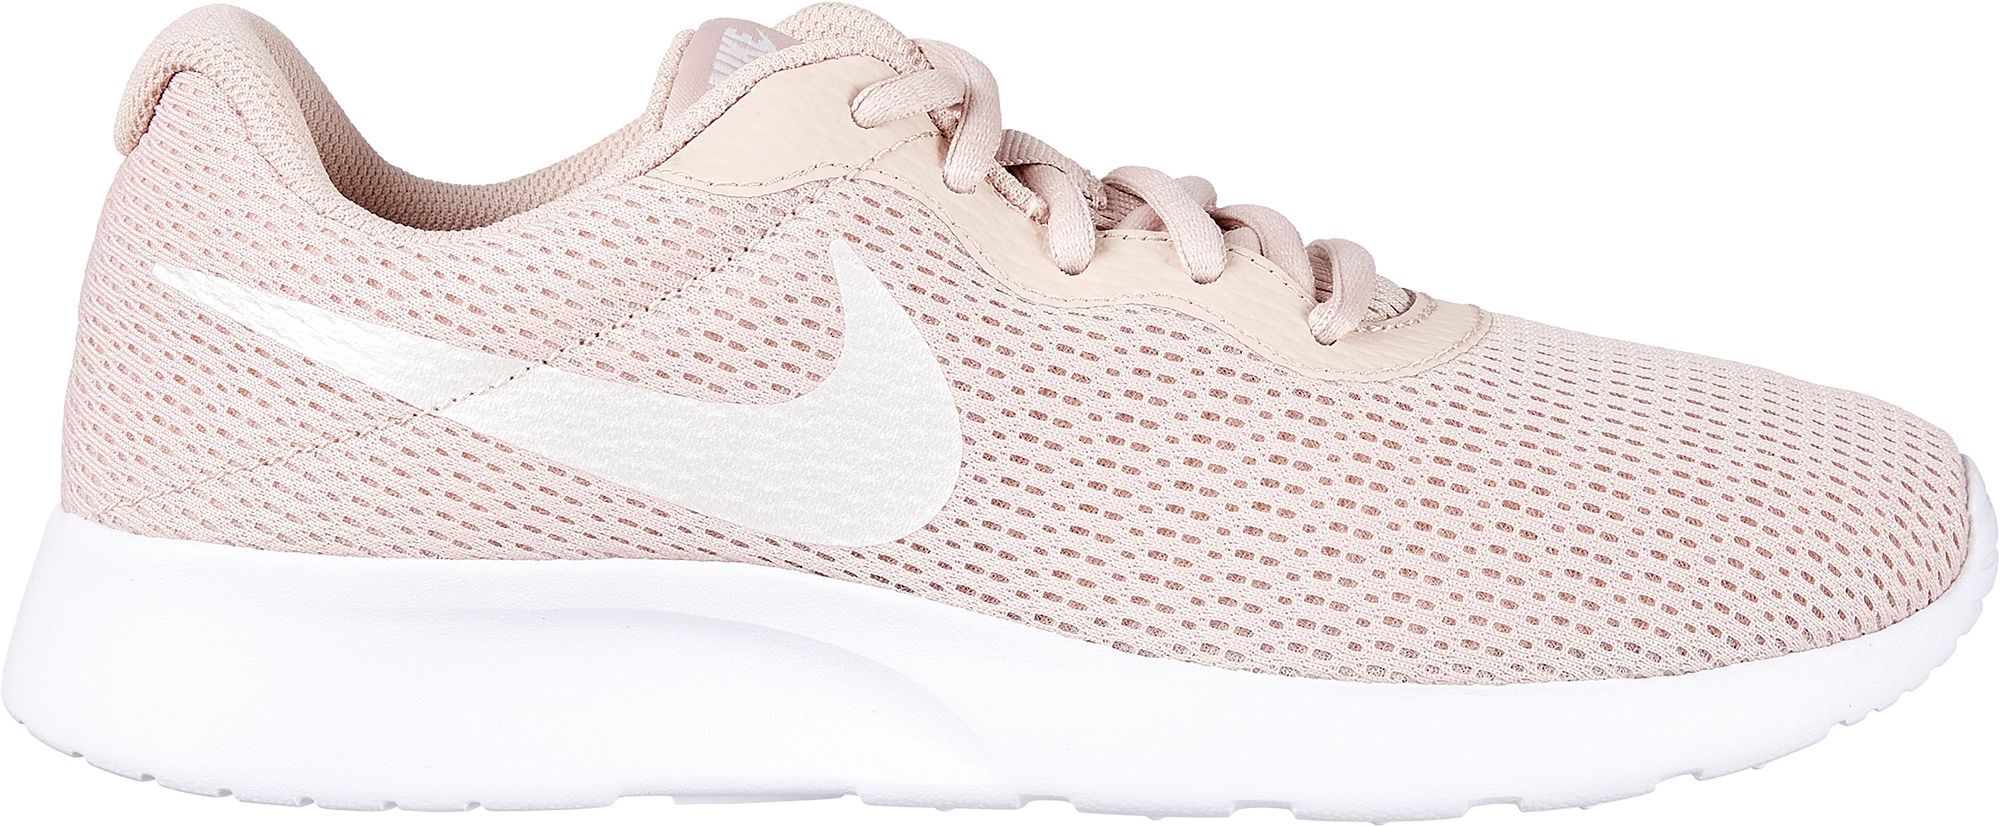 rose gold womens nike shoes